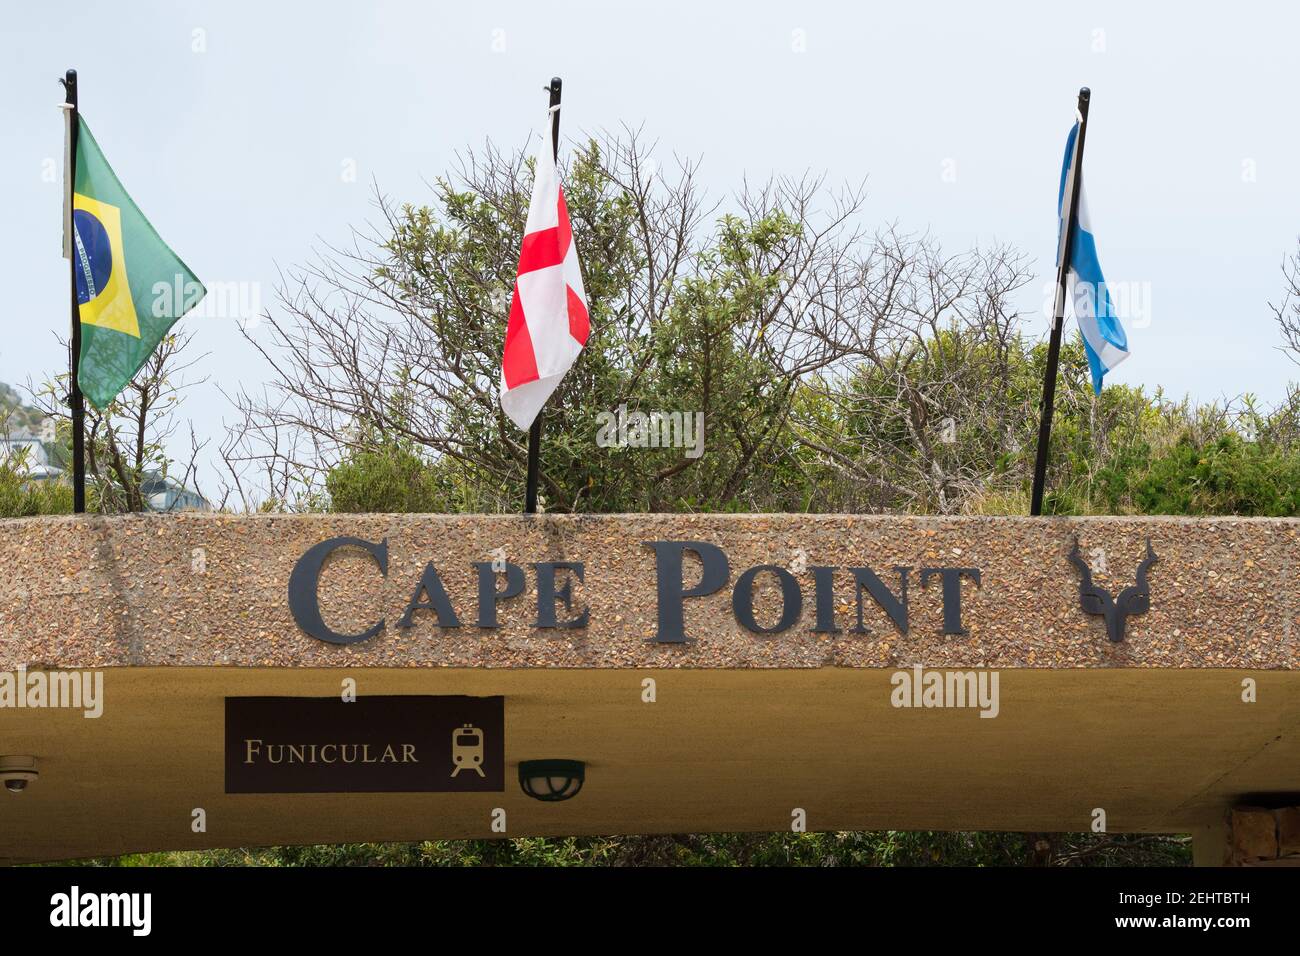 Cape Point nature reserve name at the funicular terminal with international country flags above concept travel destination in South Africa Stock Photo